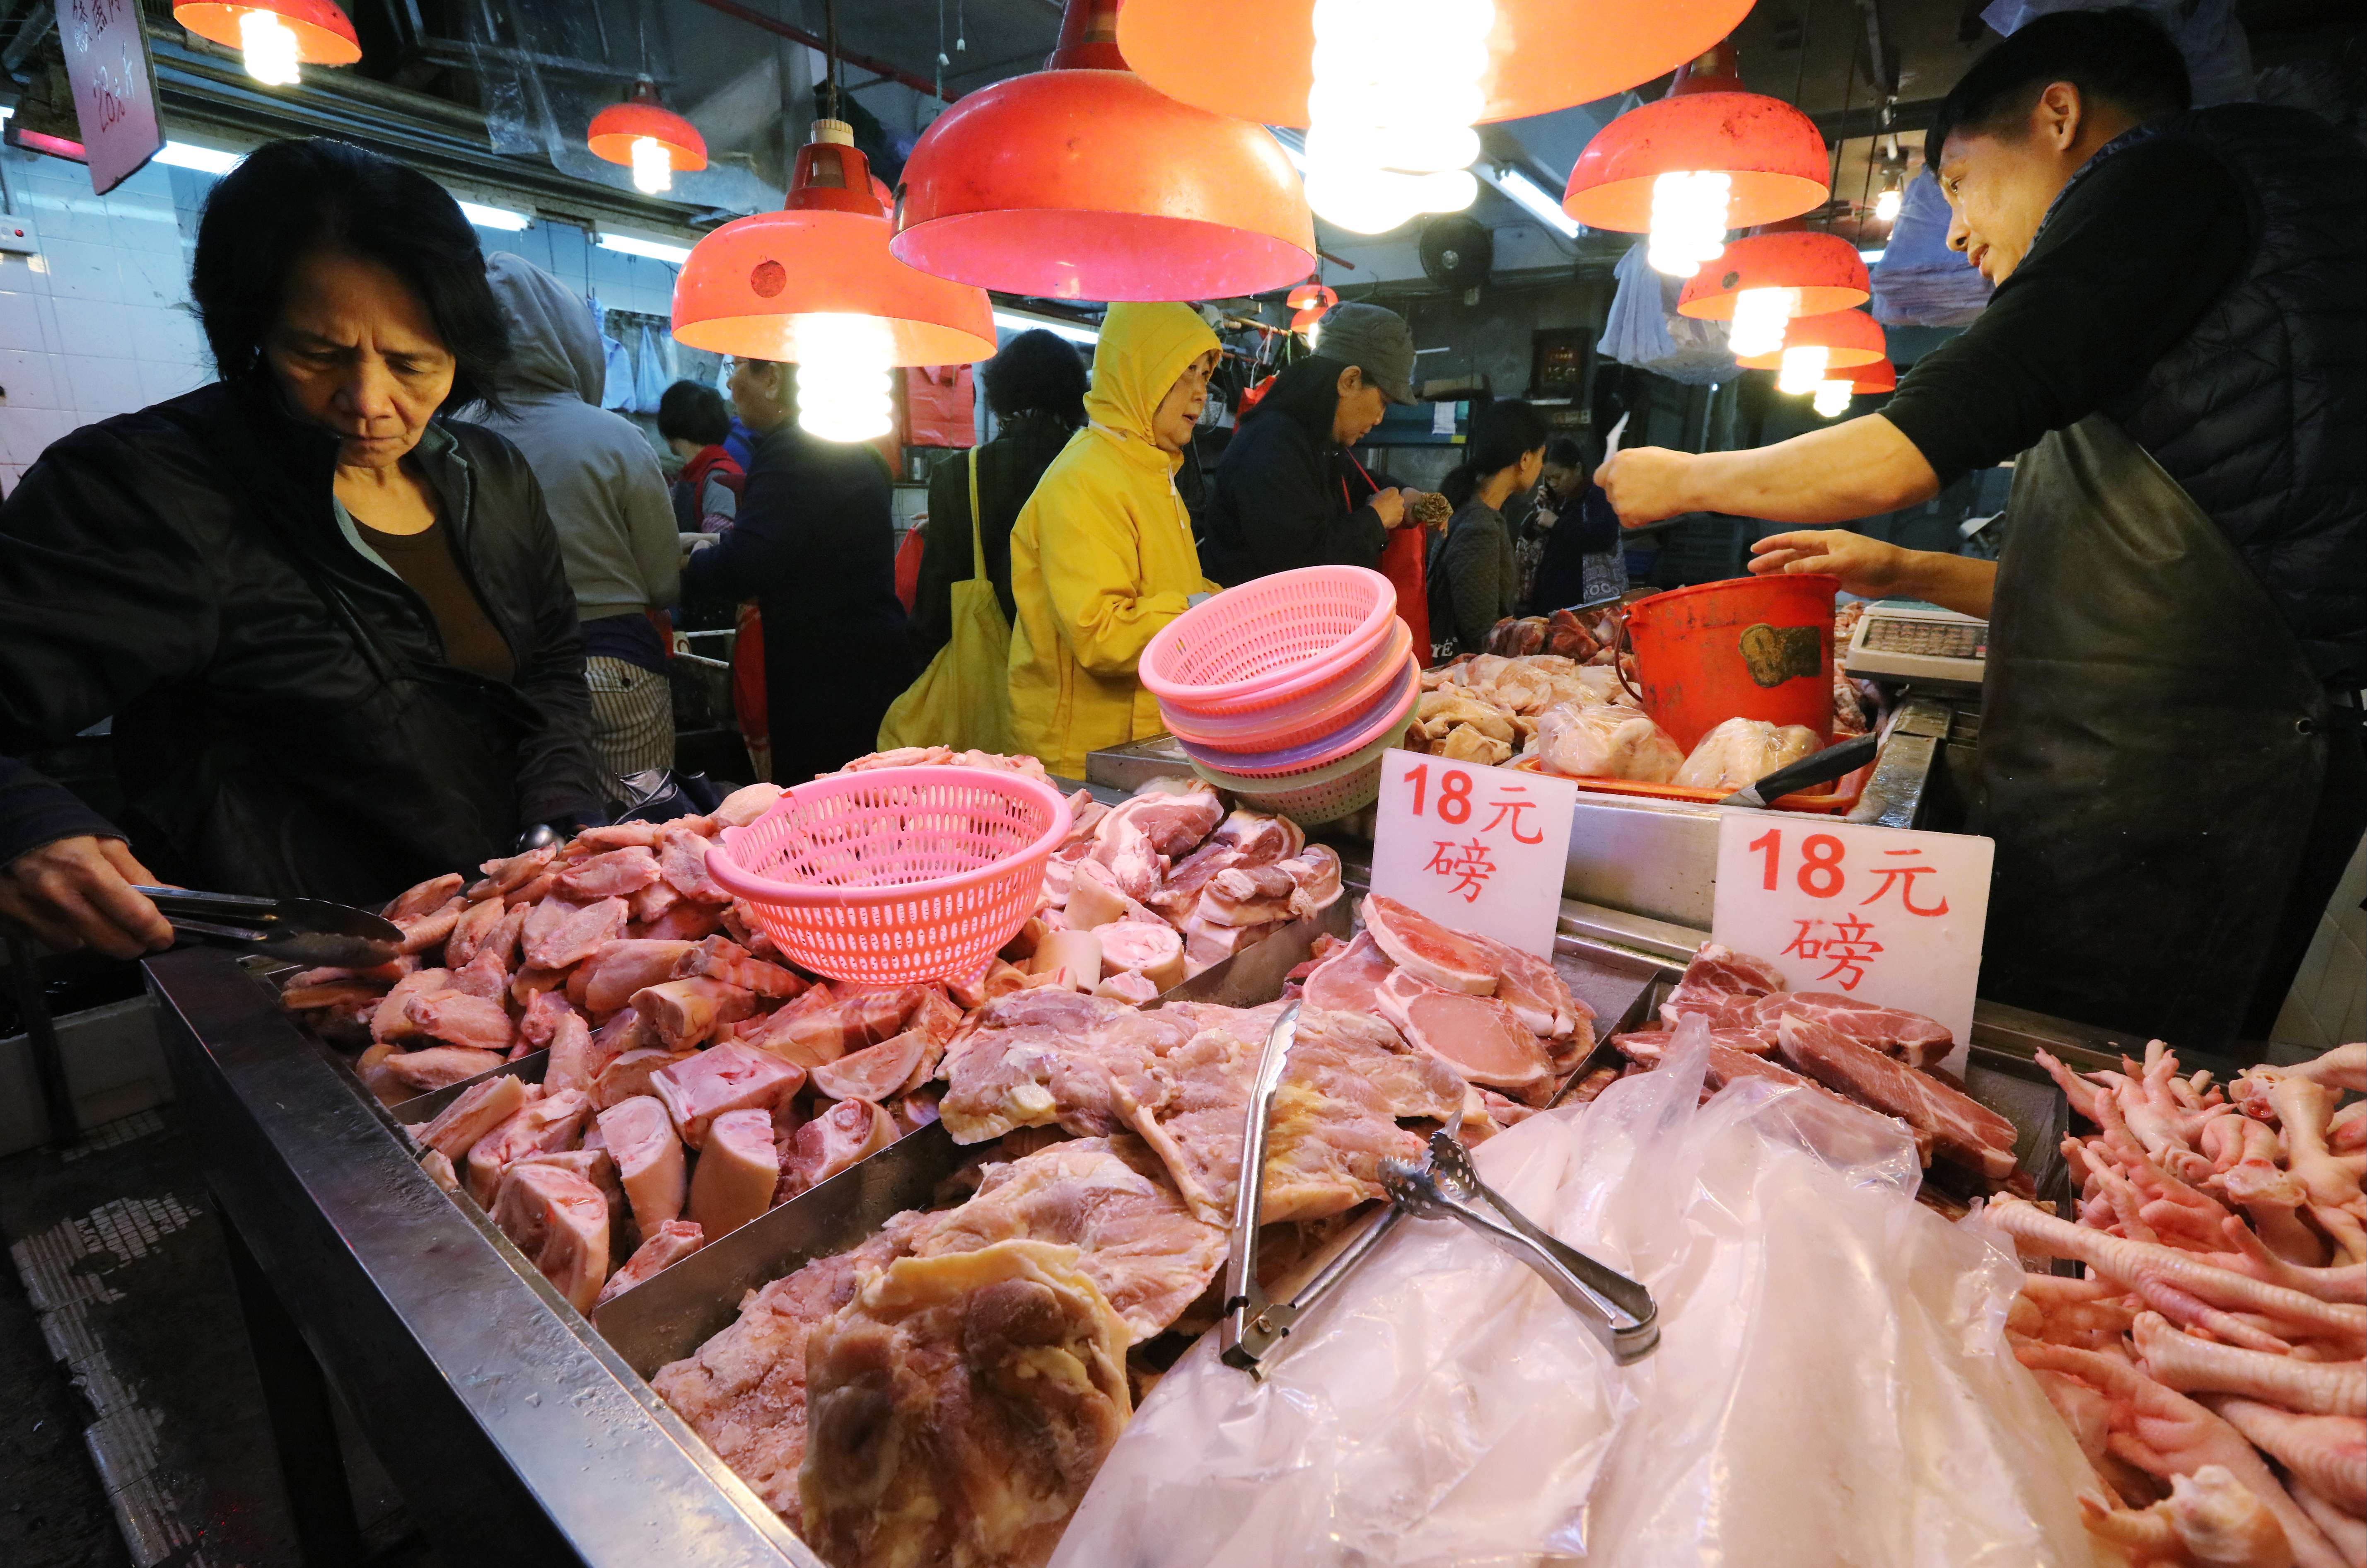 Meat prices could shoot up, import and restaurant industry insiders say, following the tainted Brazilian meat scare. Photo: Felix Wong